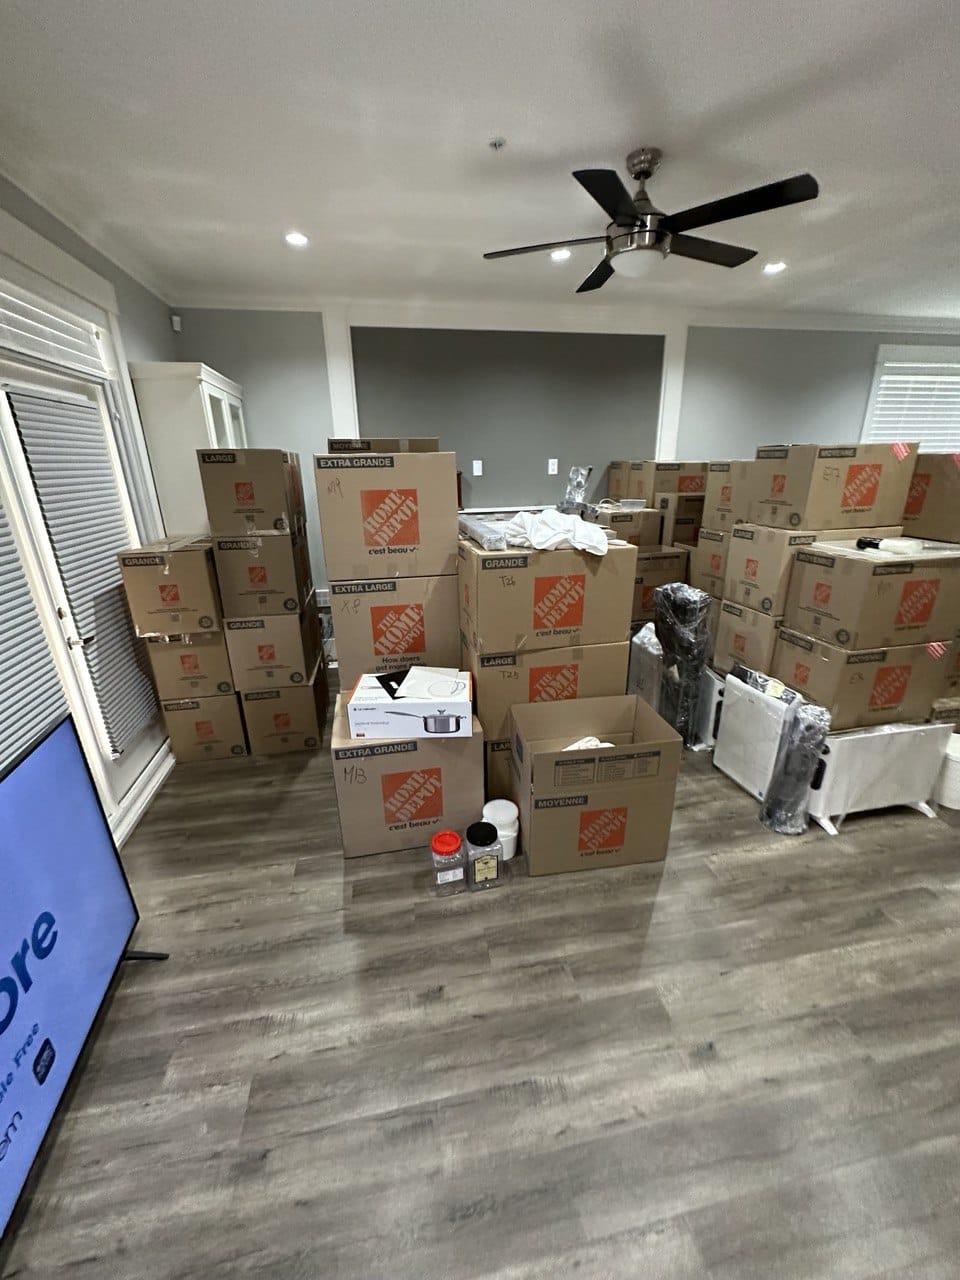 Hiring Movers vs. Moving Yourself